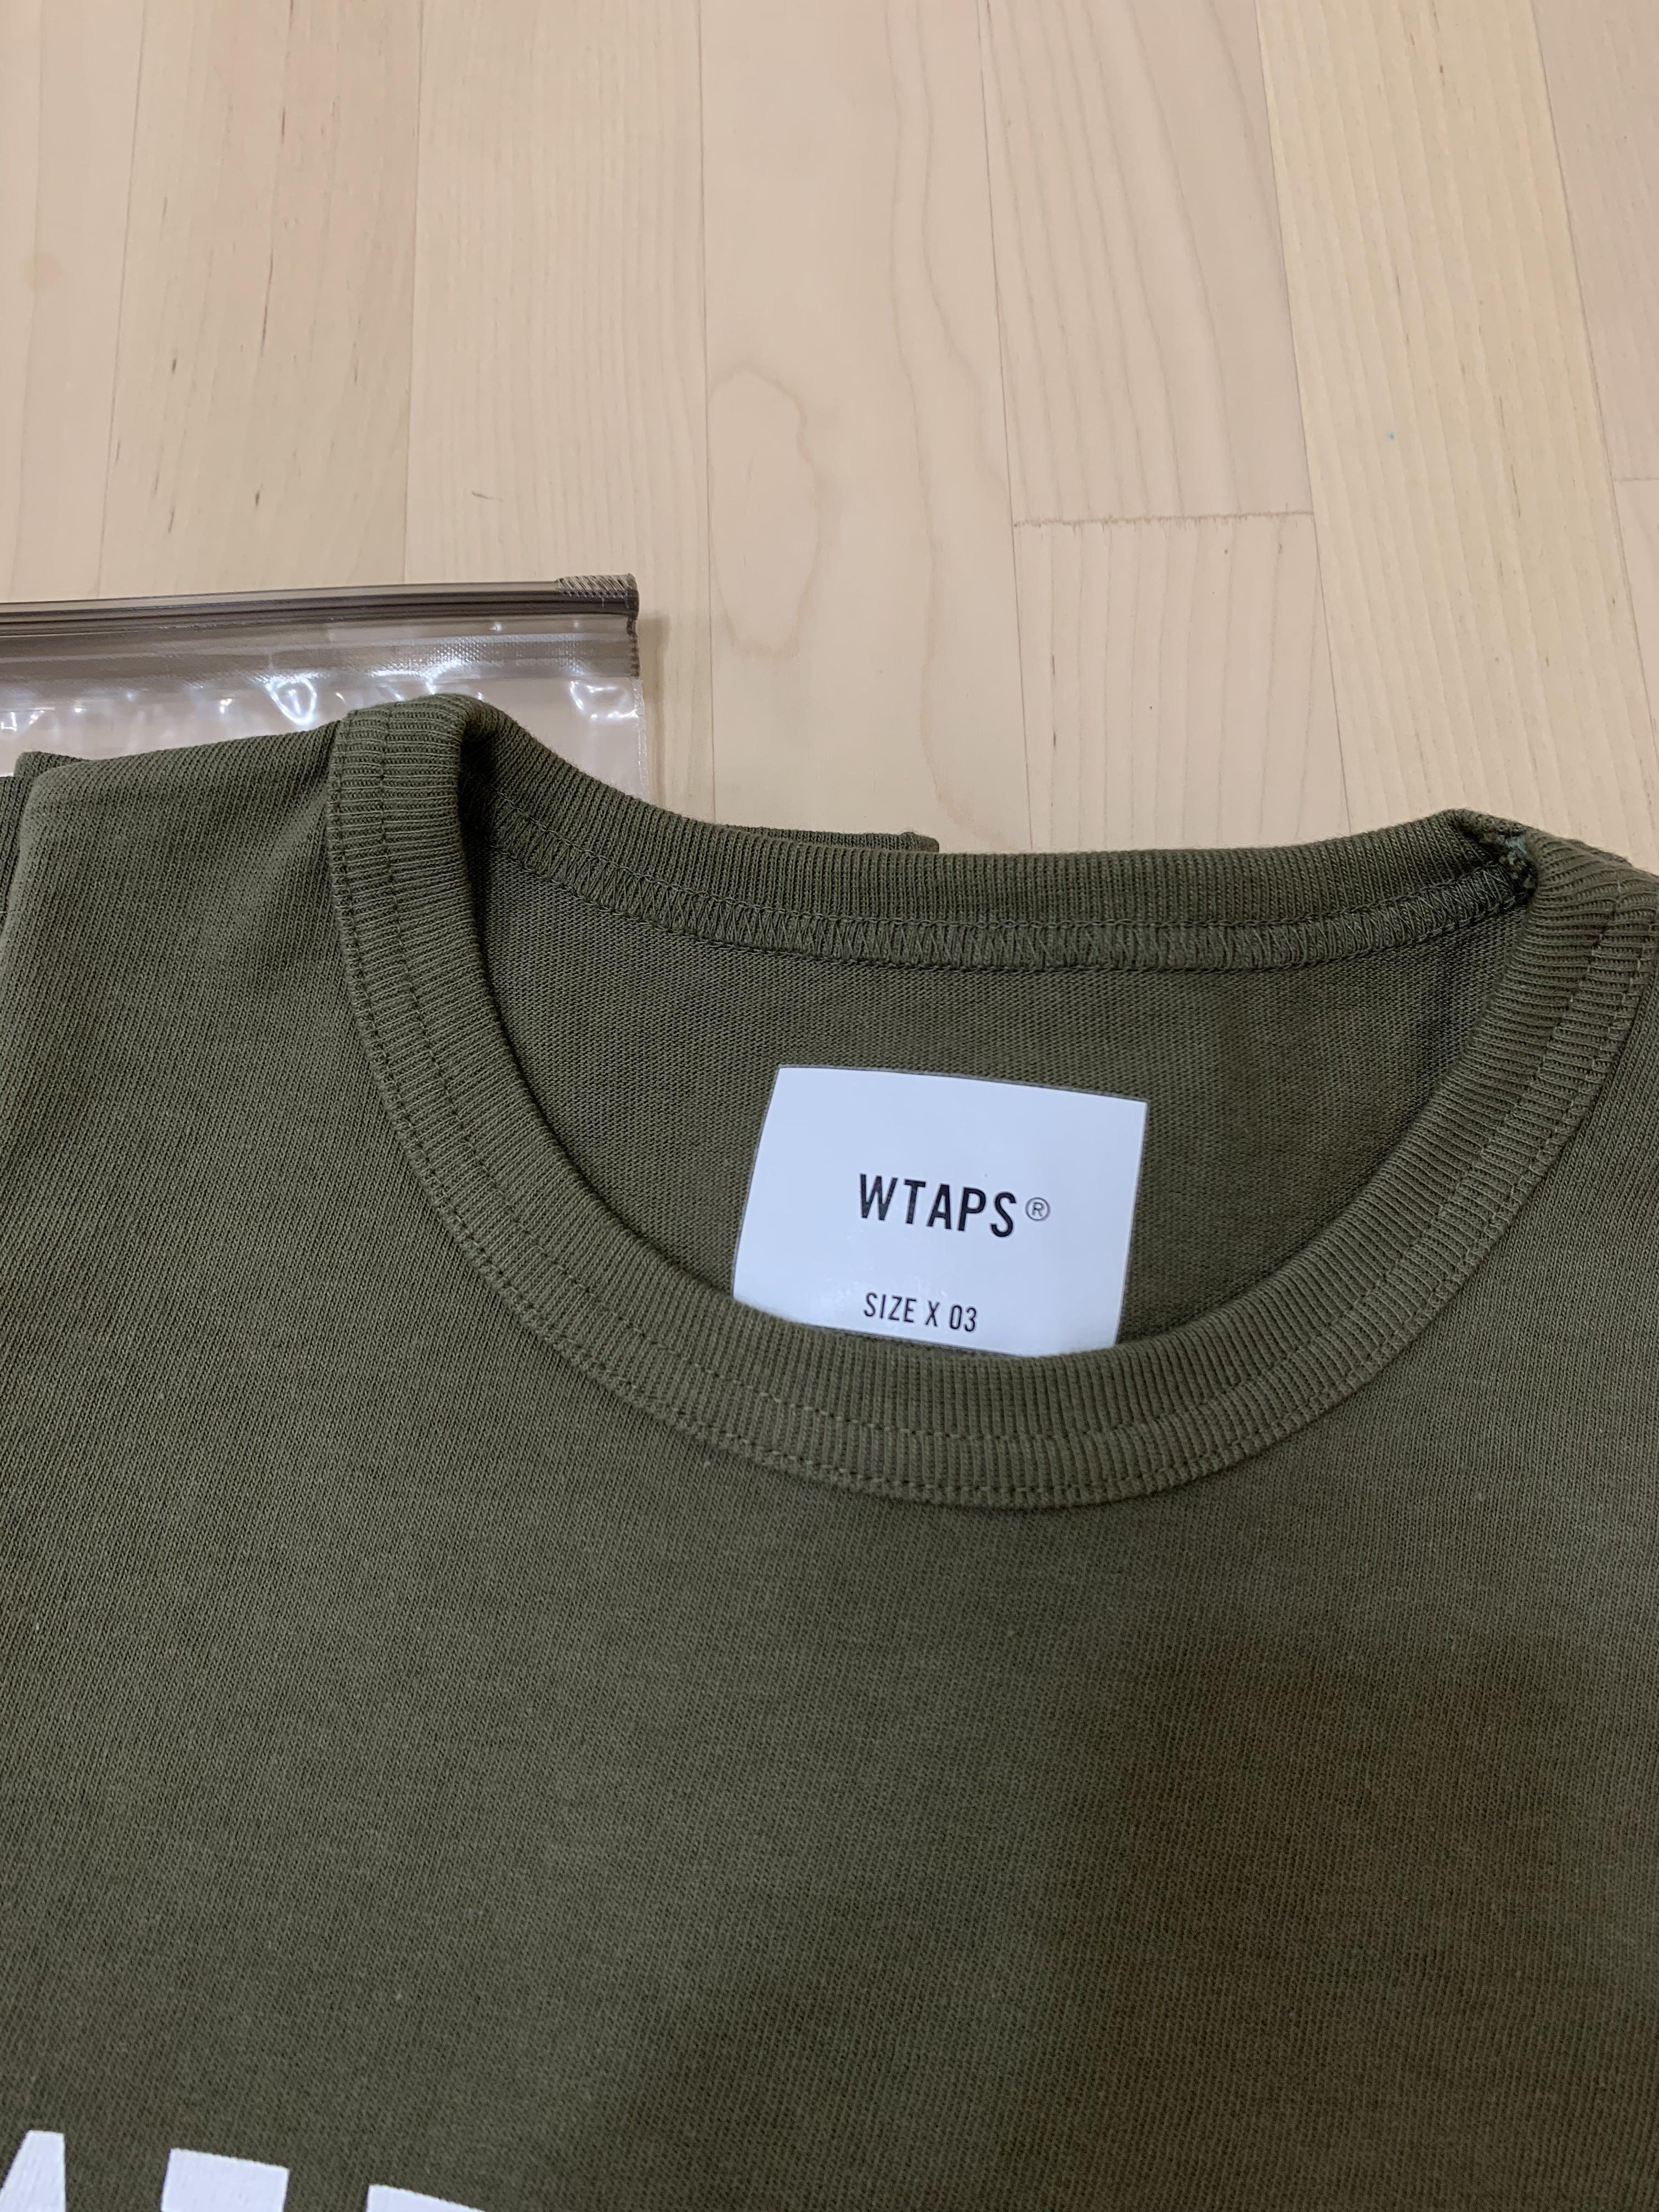 WTAPS 21SS College SS Tee / Size 03 / Olive drab / 100% new, 男裝